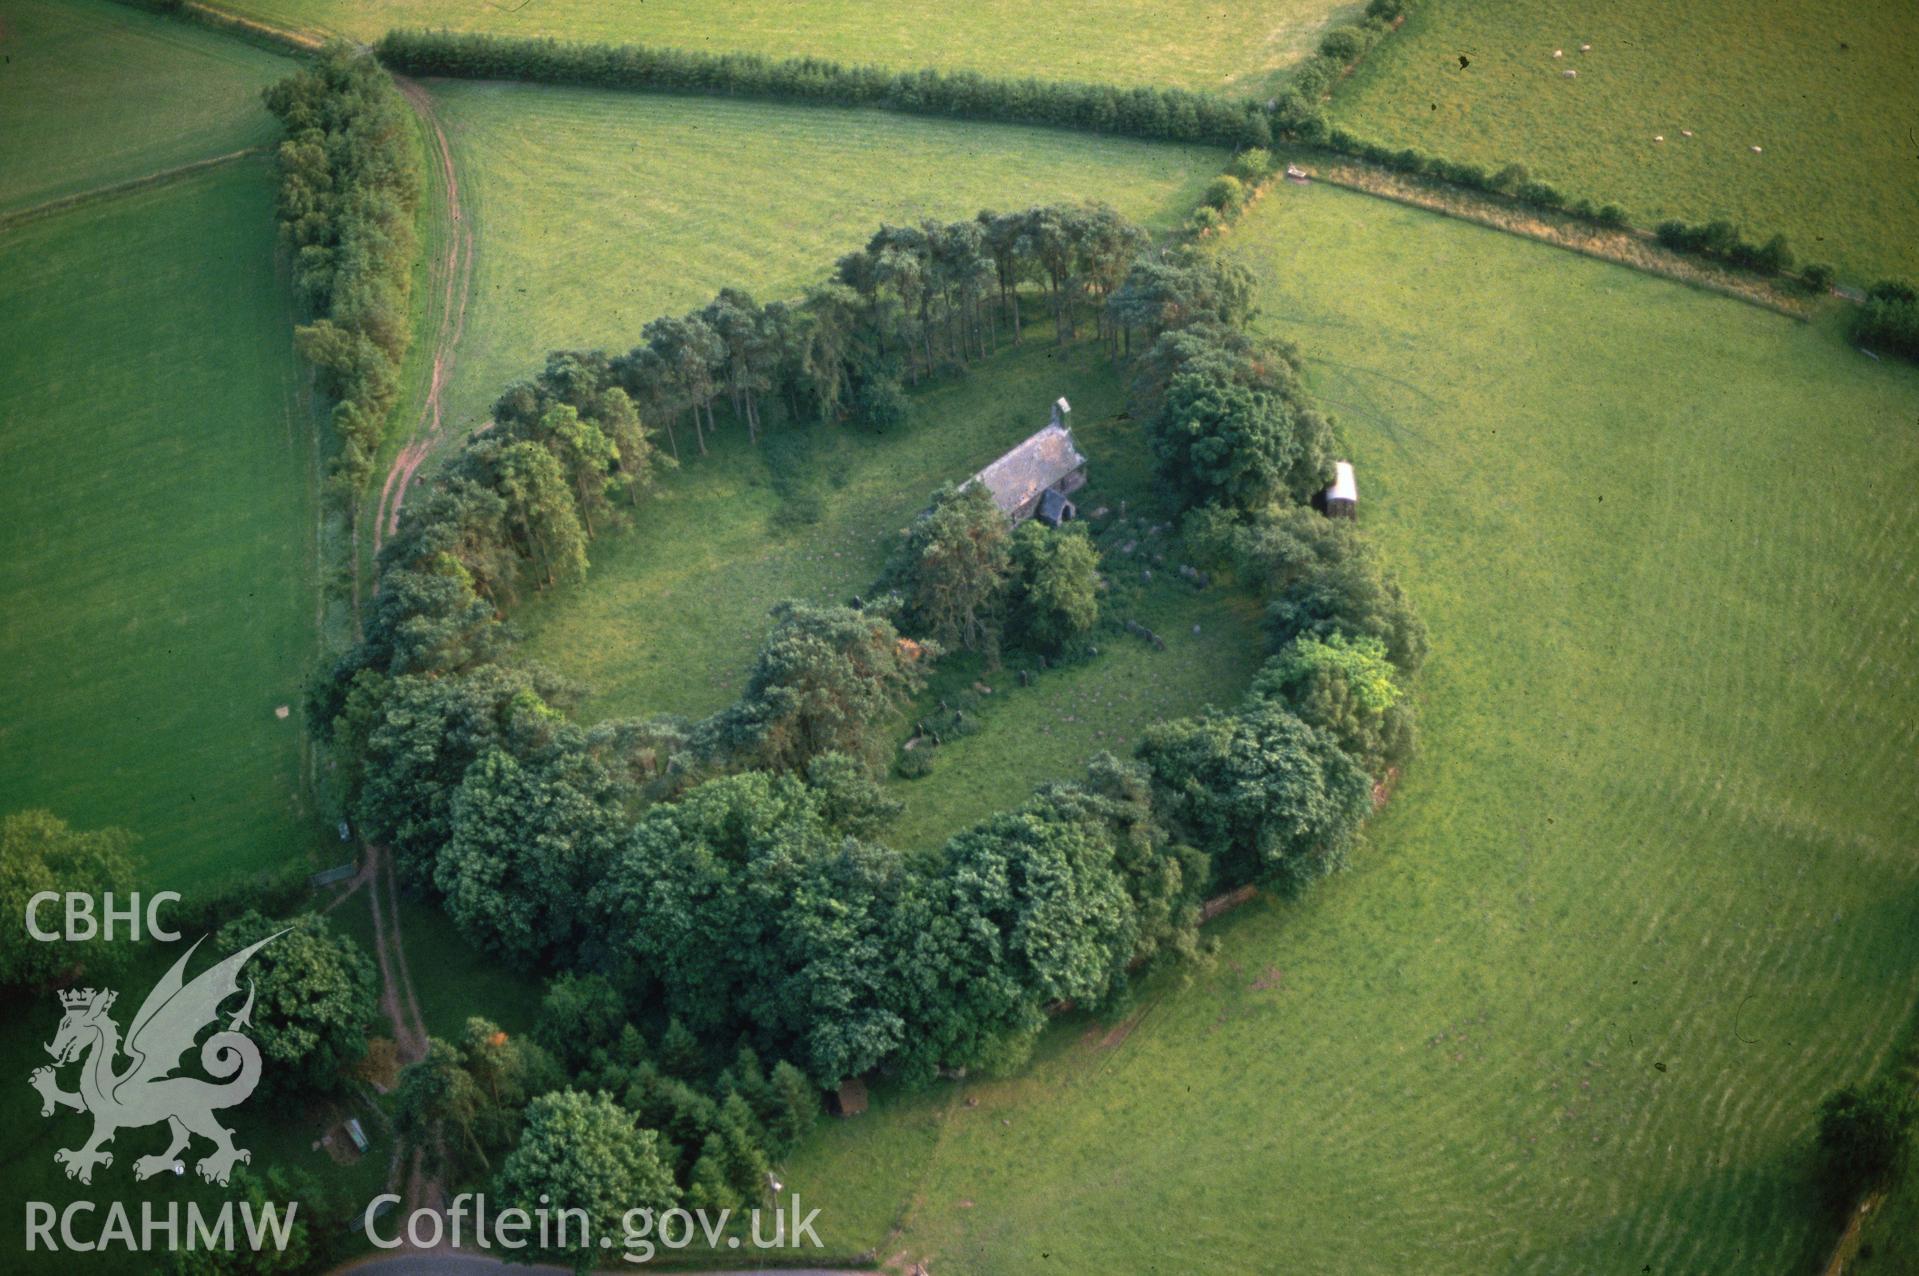 Slide of RCAHMW colour oblique aerial photograph of Glyn Illtyd, Earthworks; Llanilltyd,  taken by C.R. Musson, 5/7/1989.